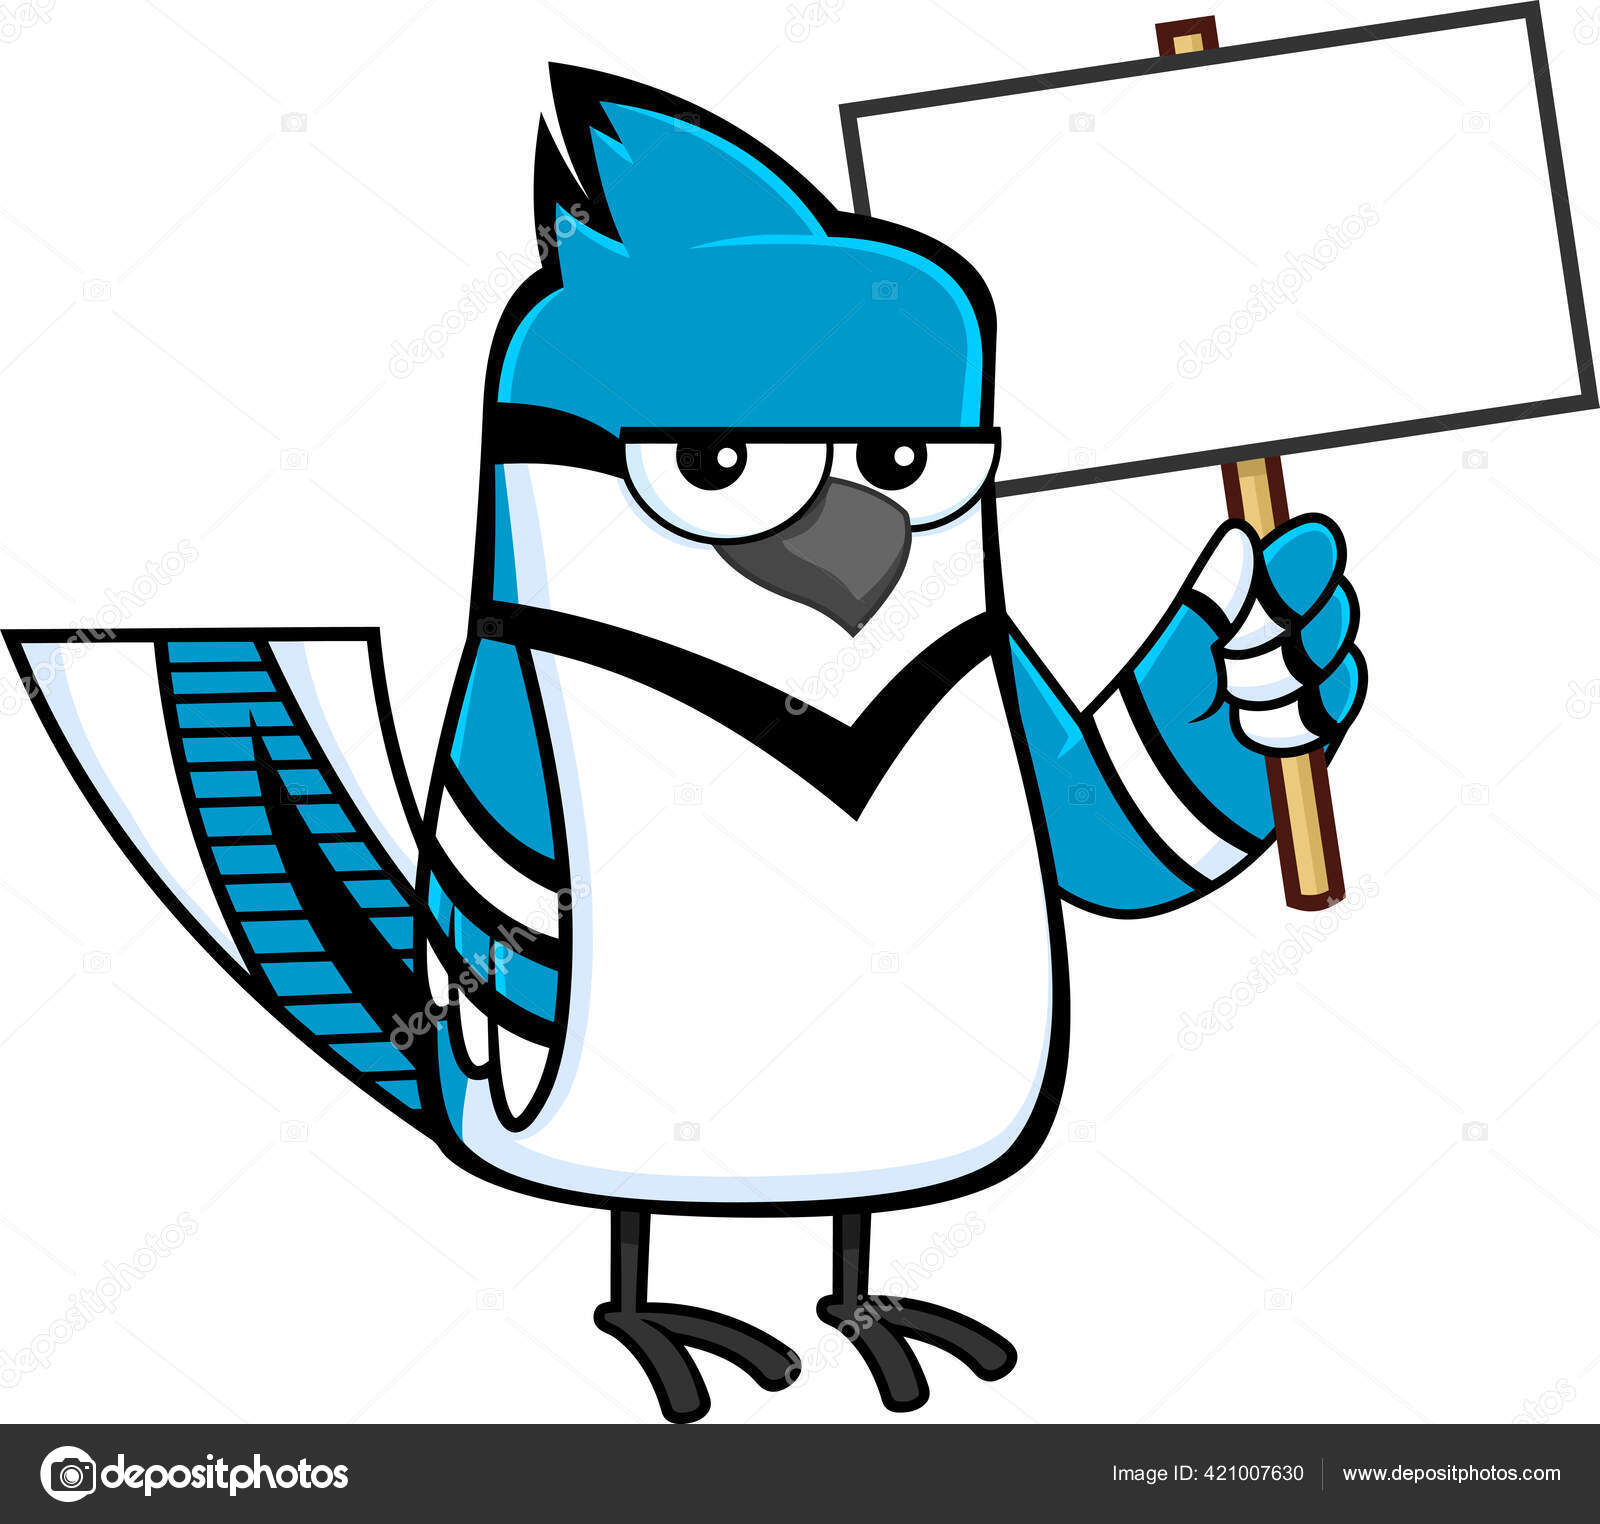 Blue Jay Cartoon Images – Browse 1,384 Stock Photos, Vectors, and